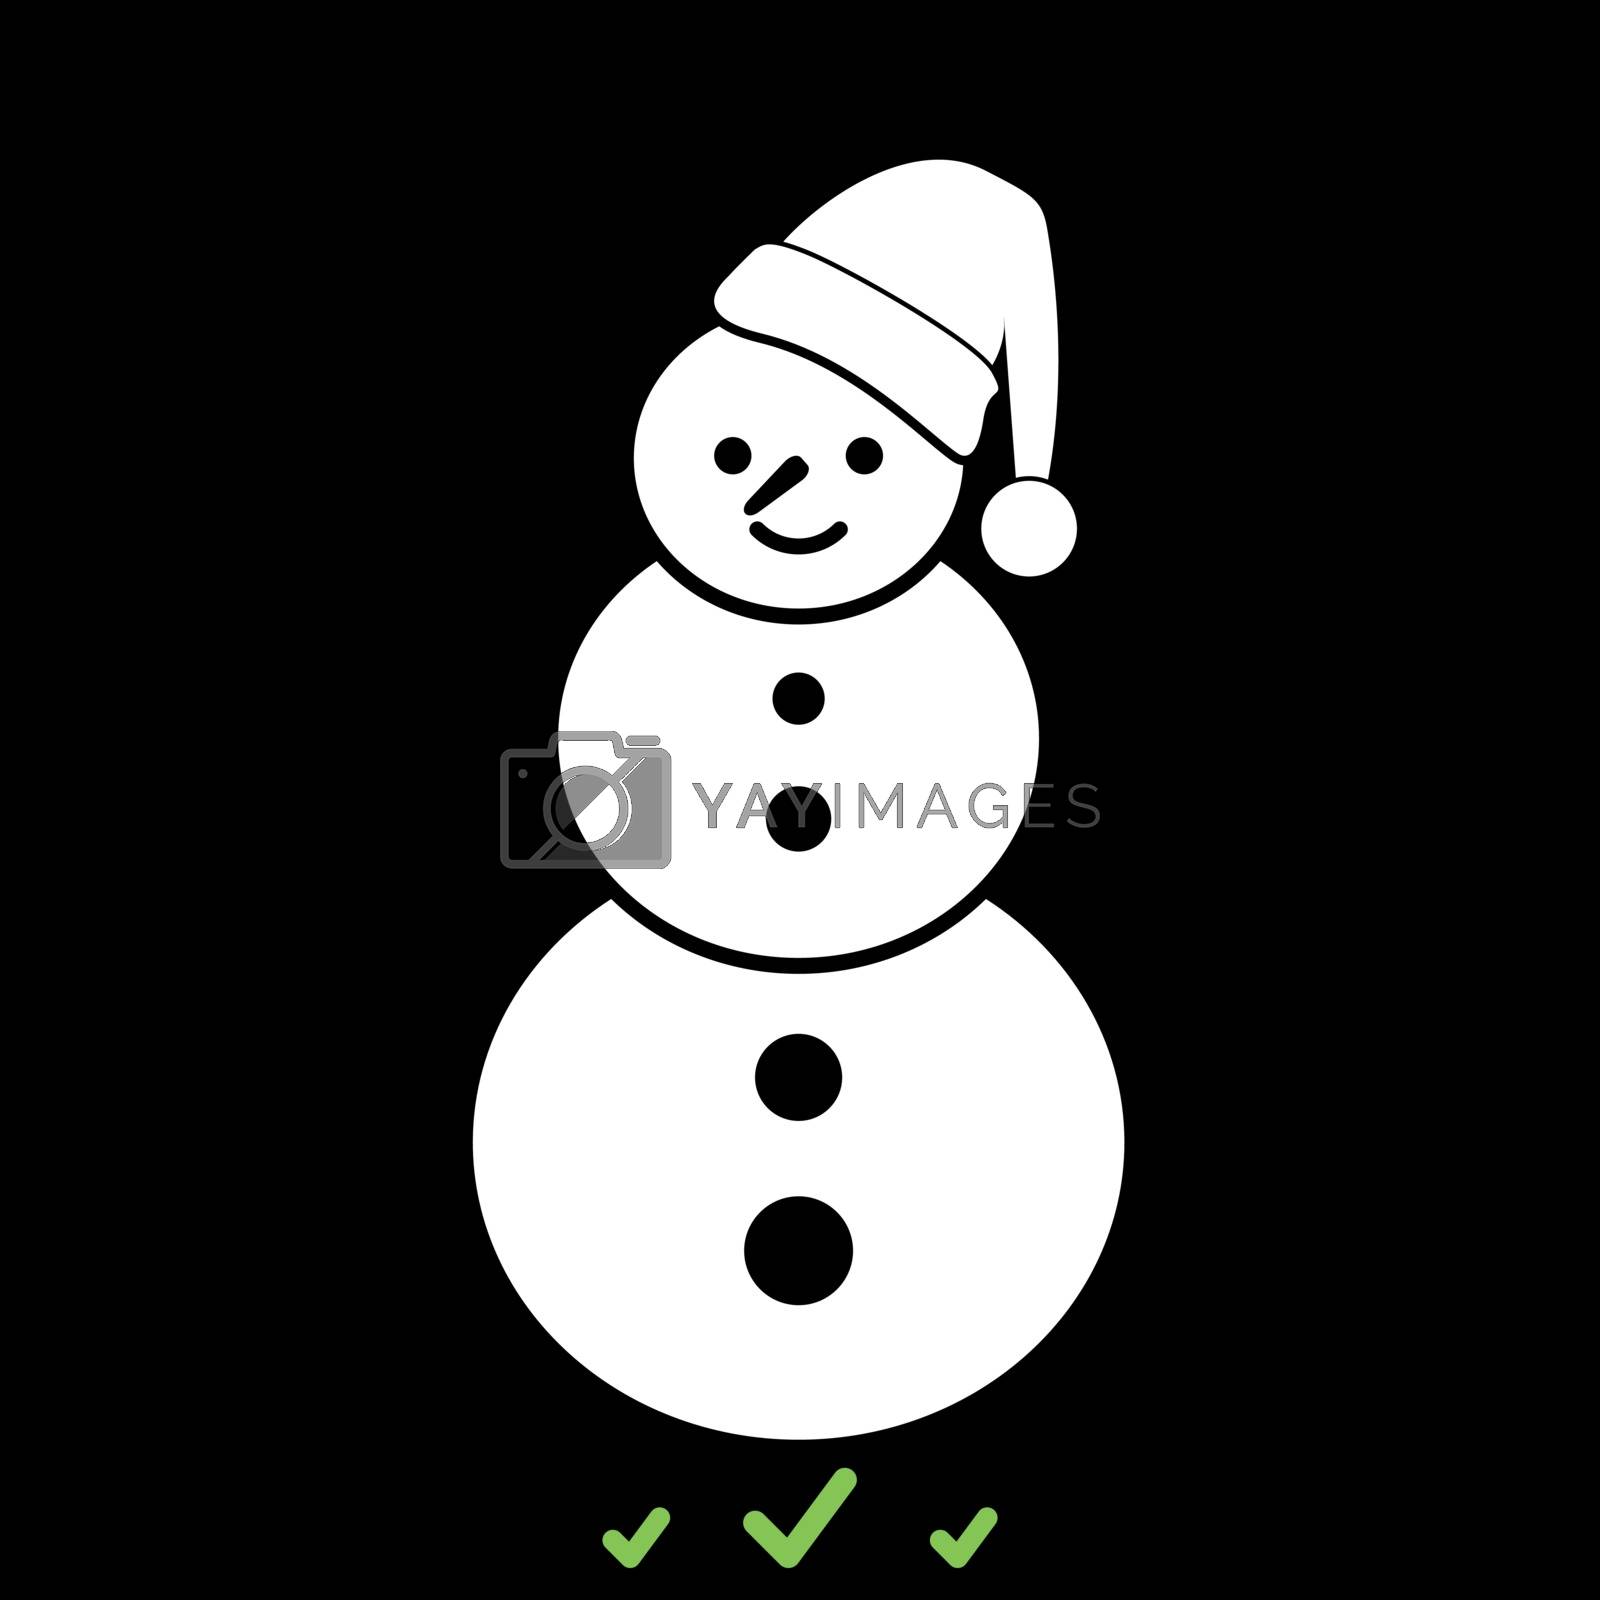 Royalty free image of Snowman it is white icon . by serhii435